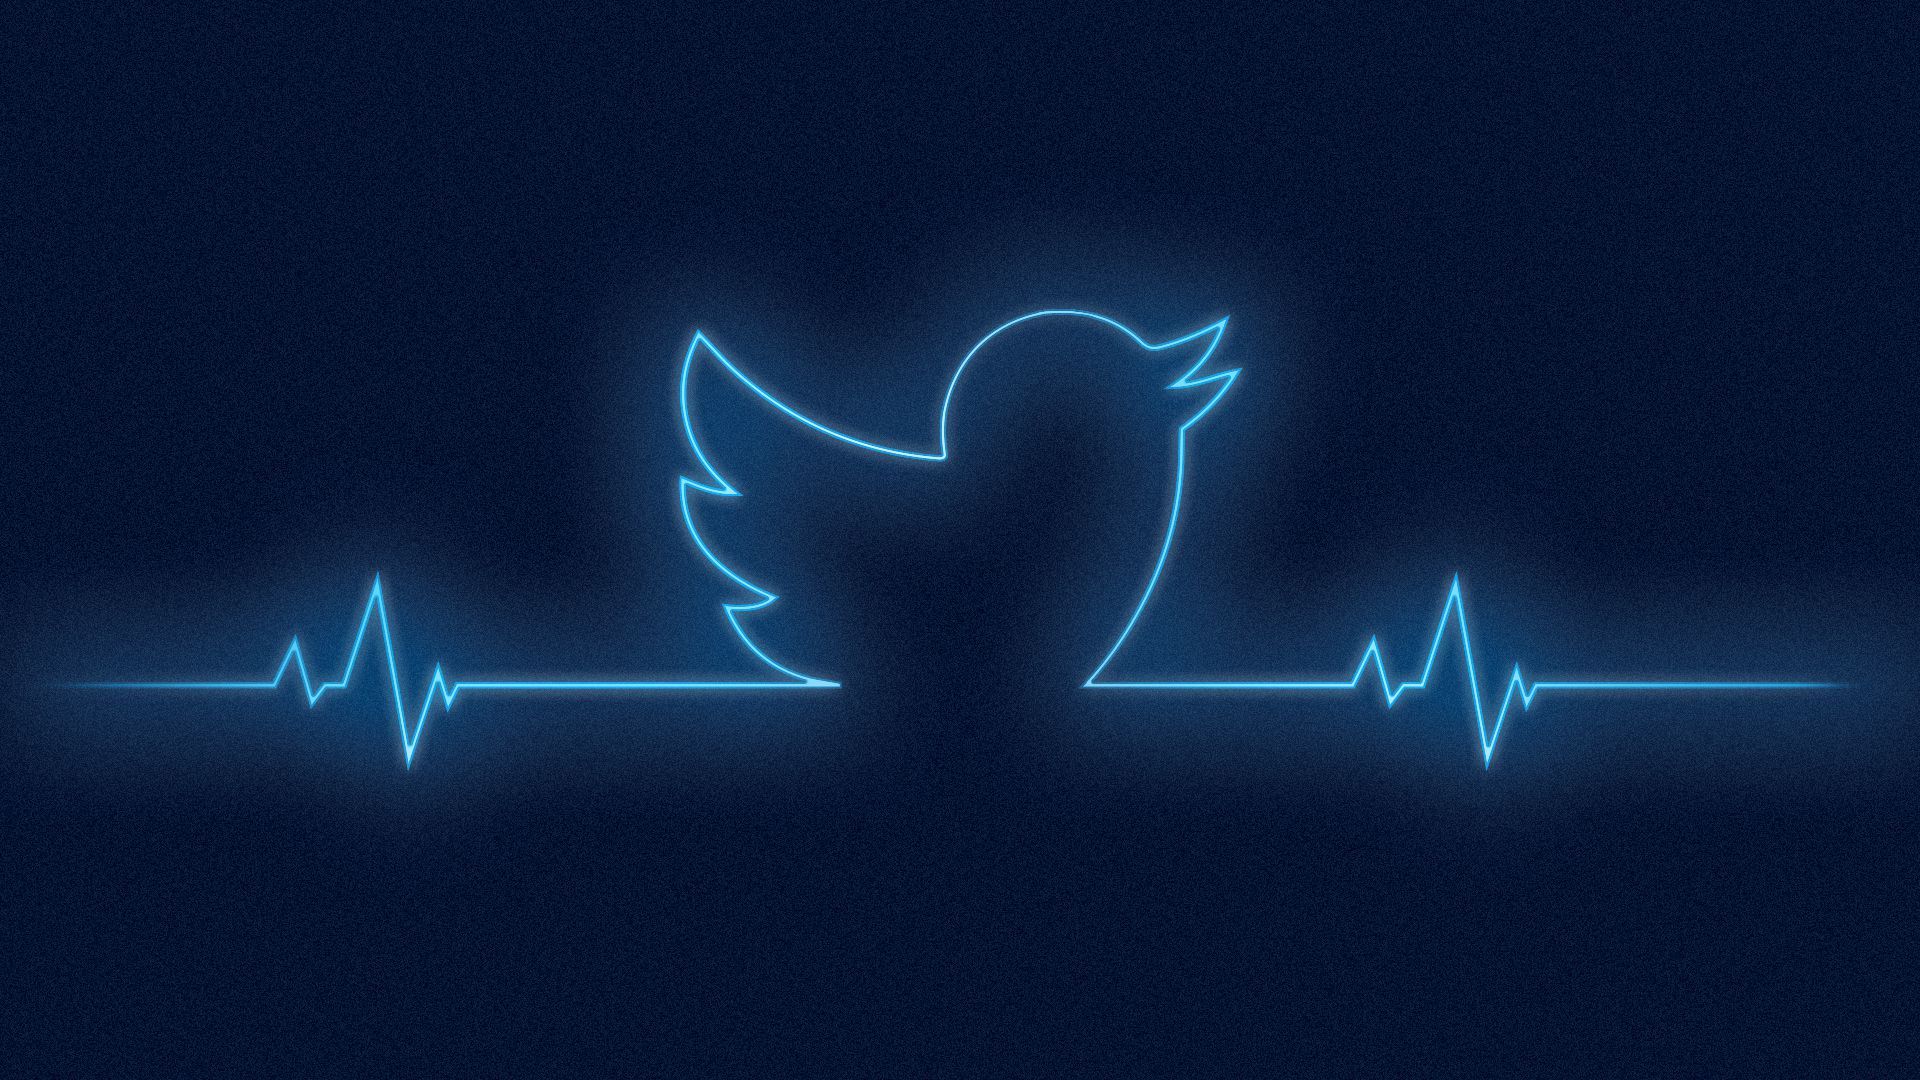 Illustration of a heartbeat line creating a partial twitter logo in between beats